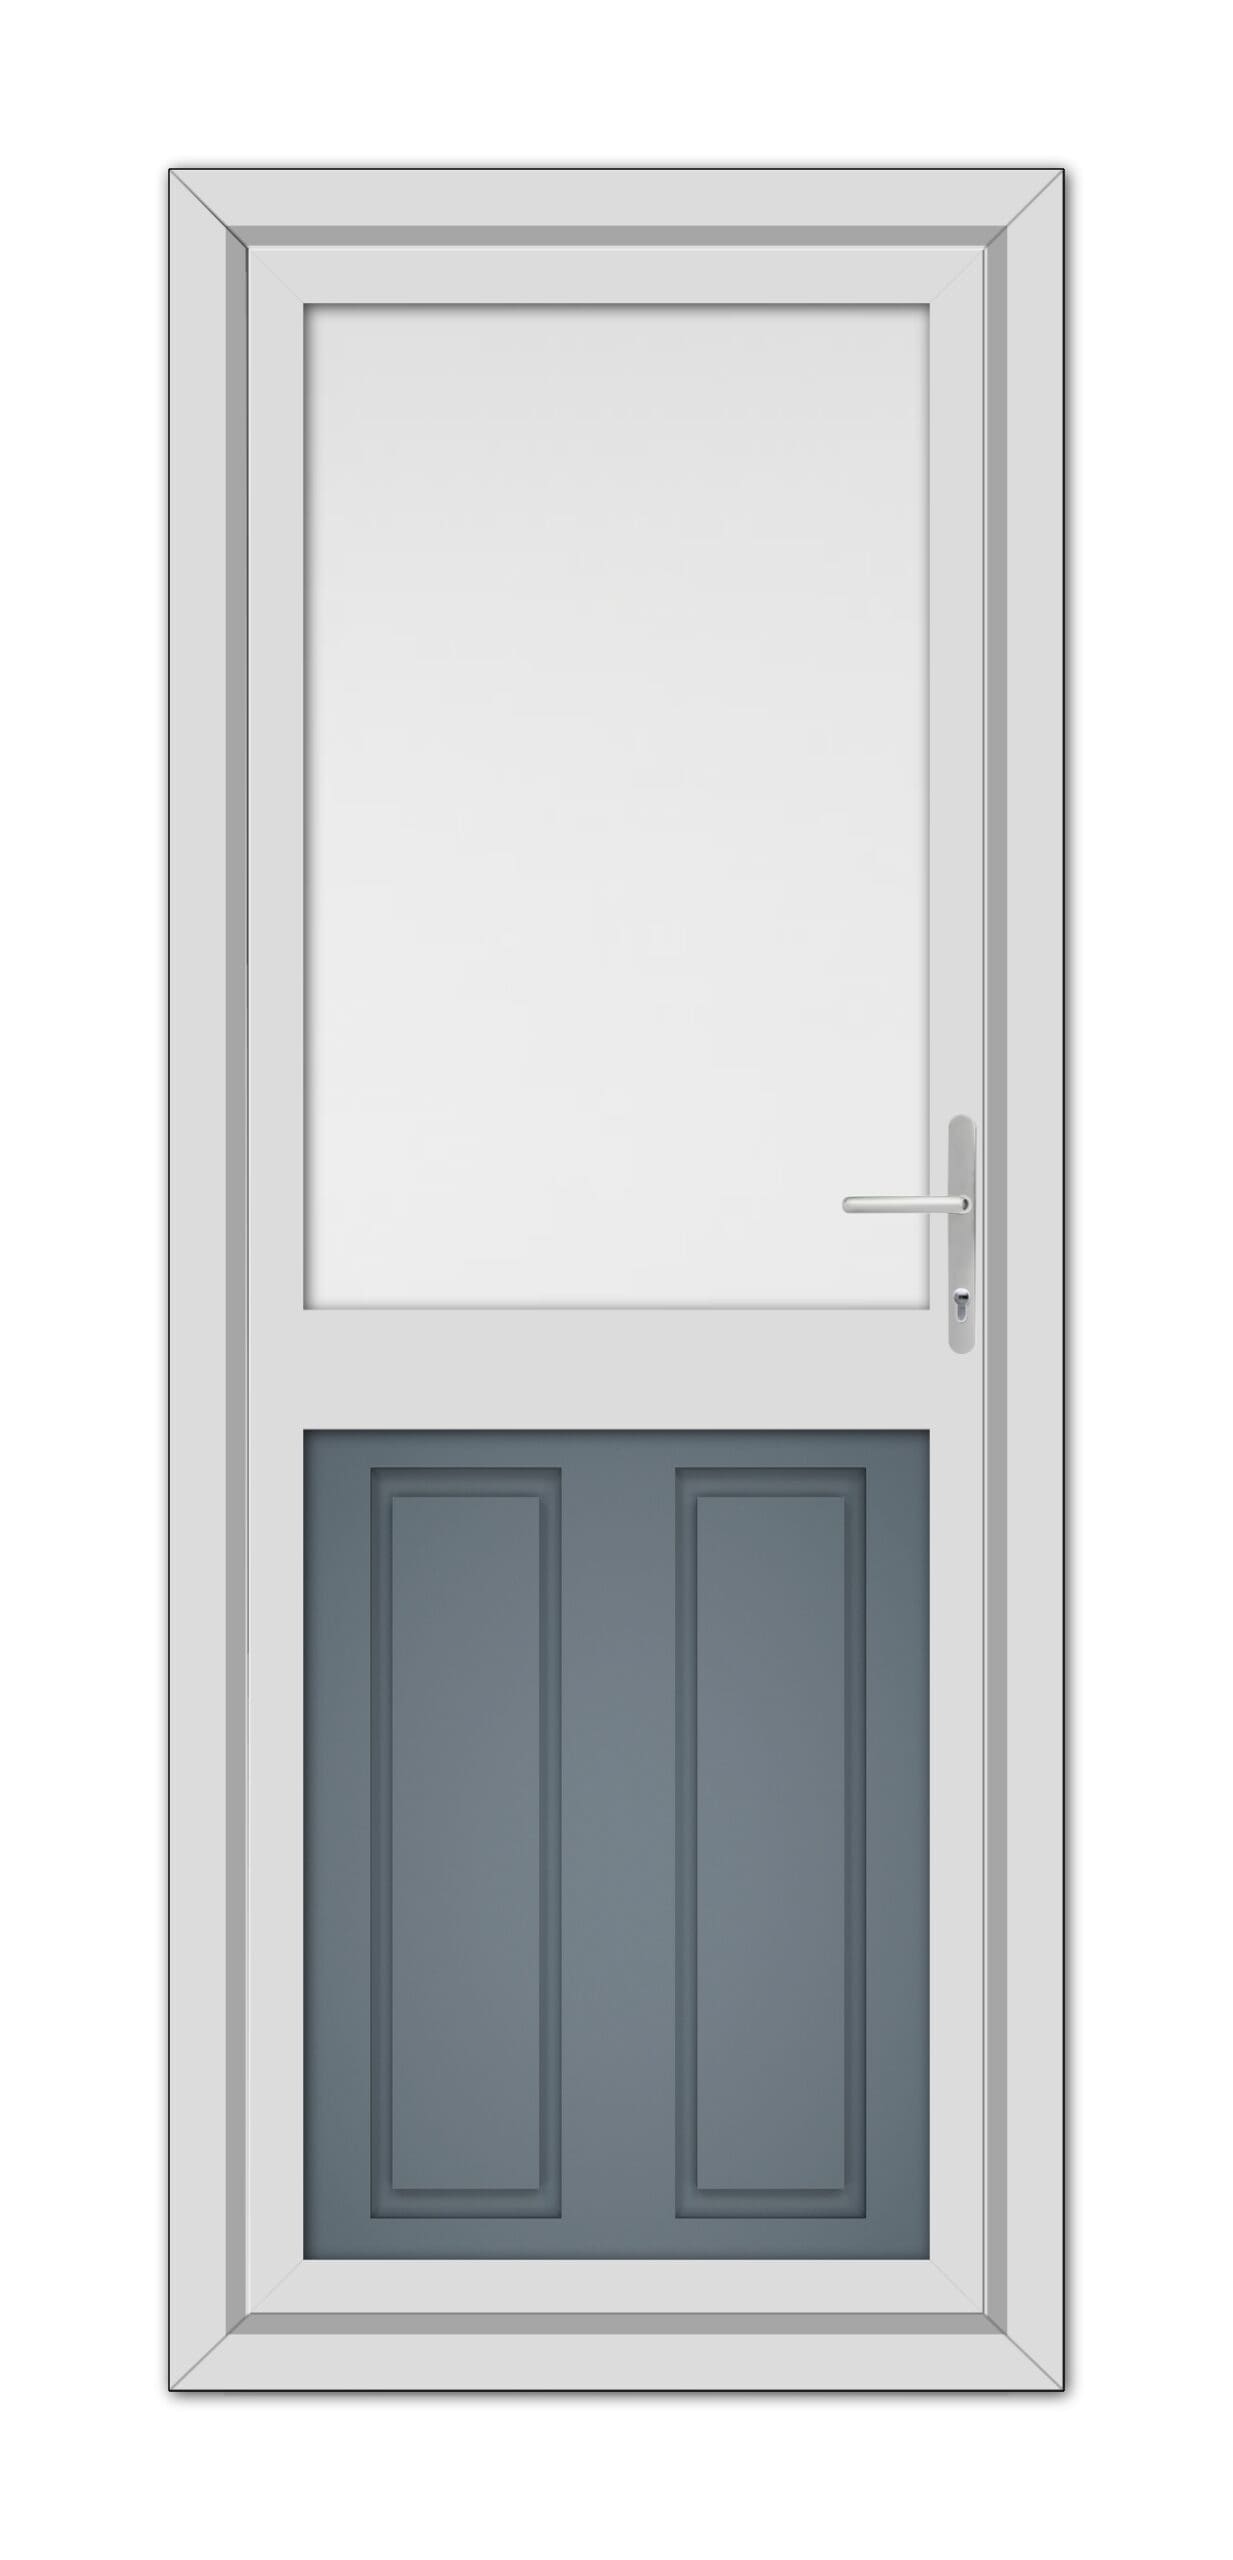 A Slate Grey Manor Half uPVC Back Door with a white frame, featuring a large glass window at the top and two solid lower panels, complete with a metal handle on the right side.